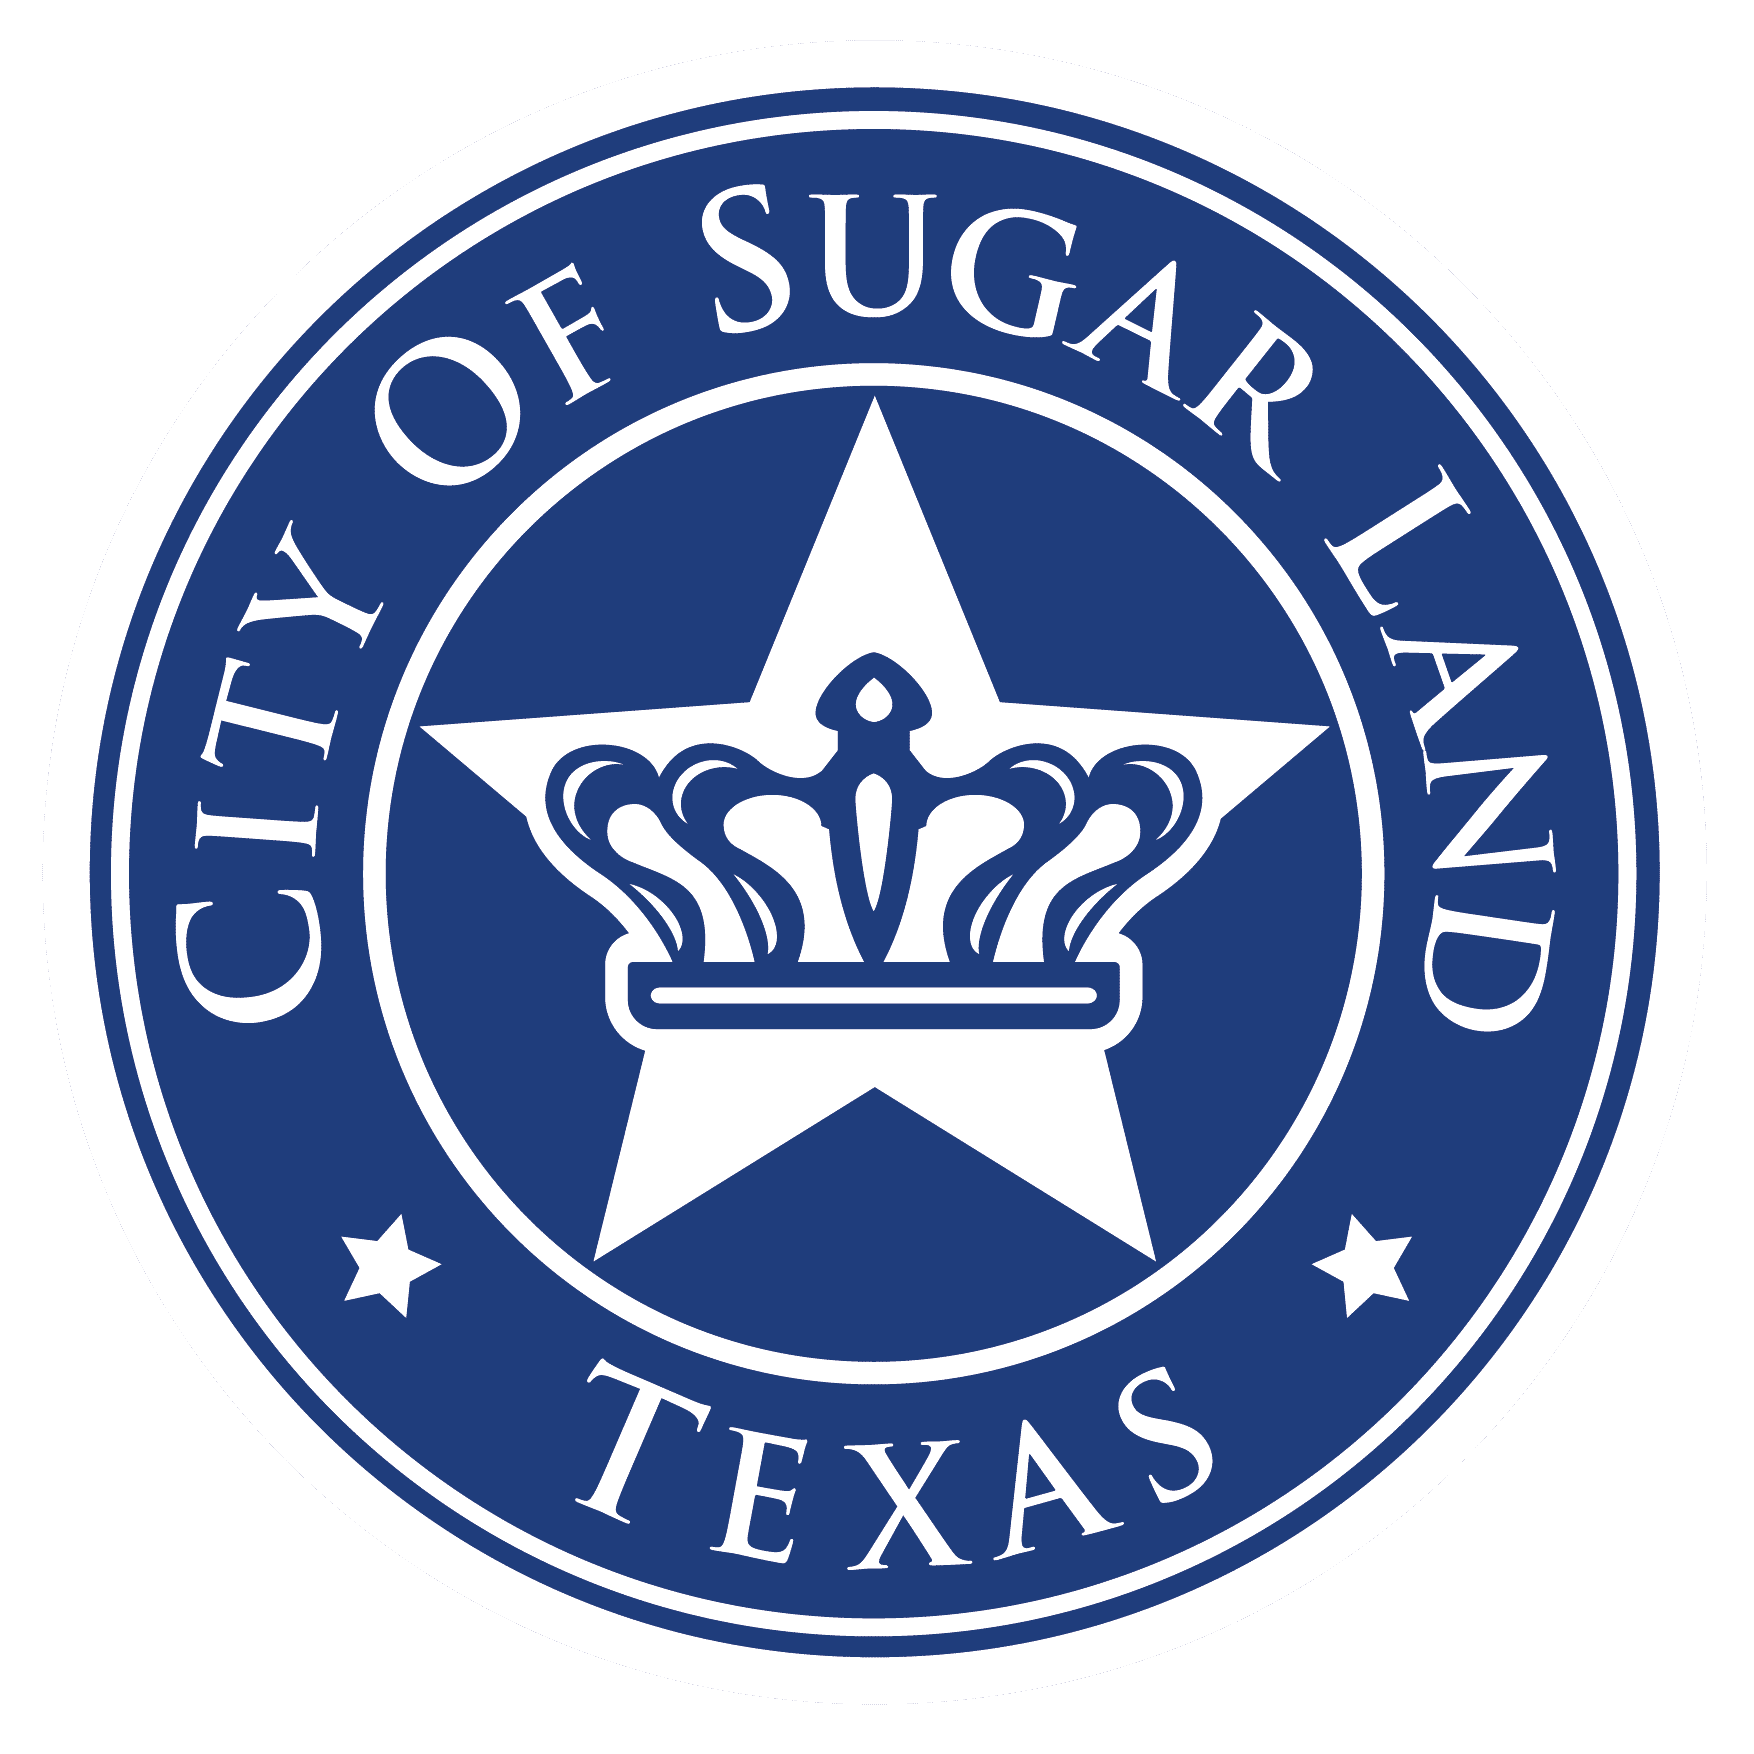 City of Sugar Land: a client of Eproval